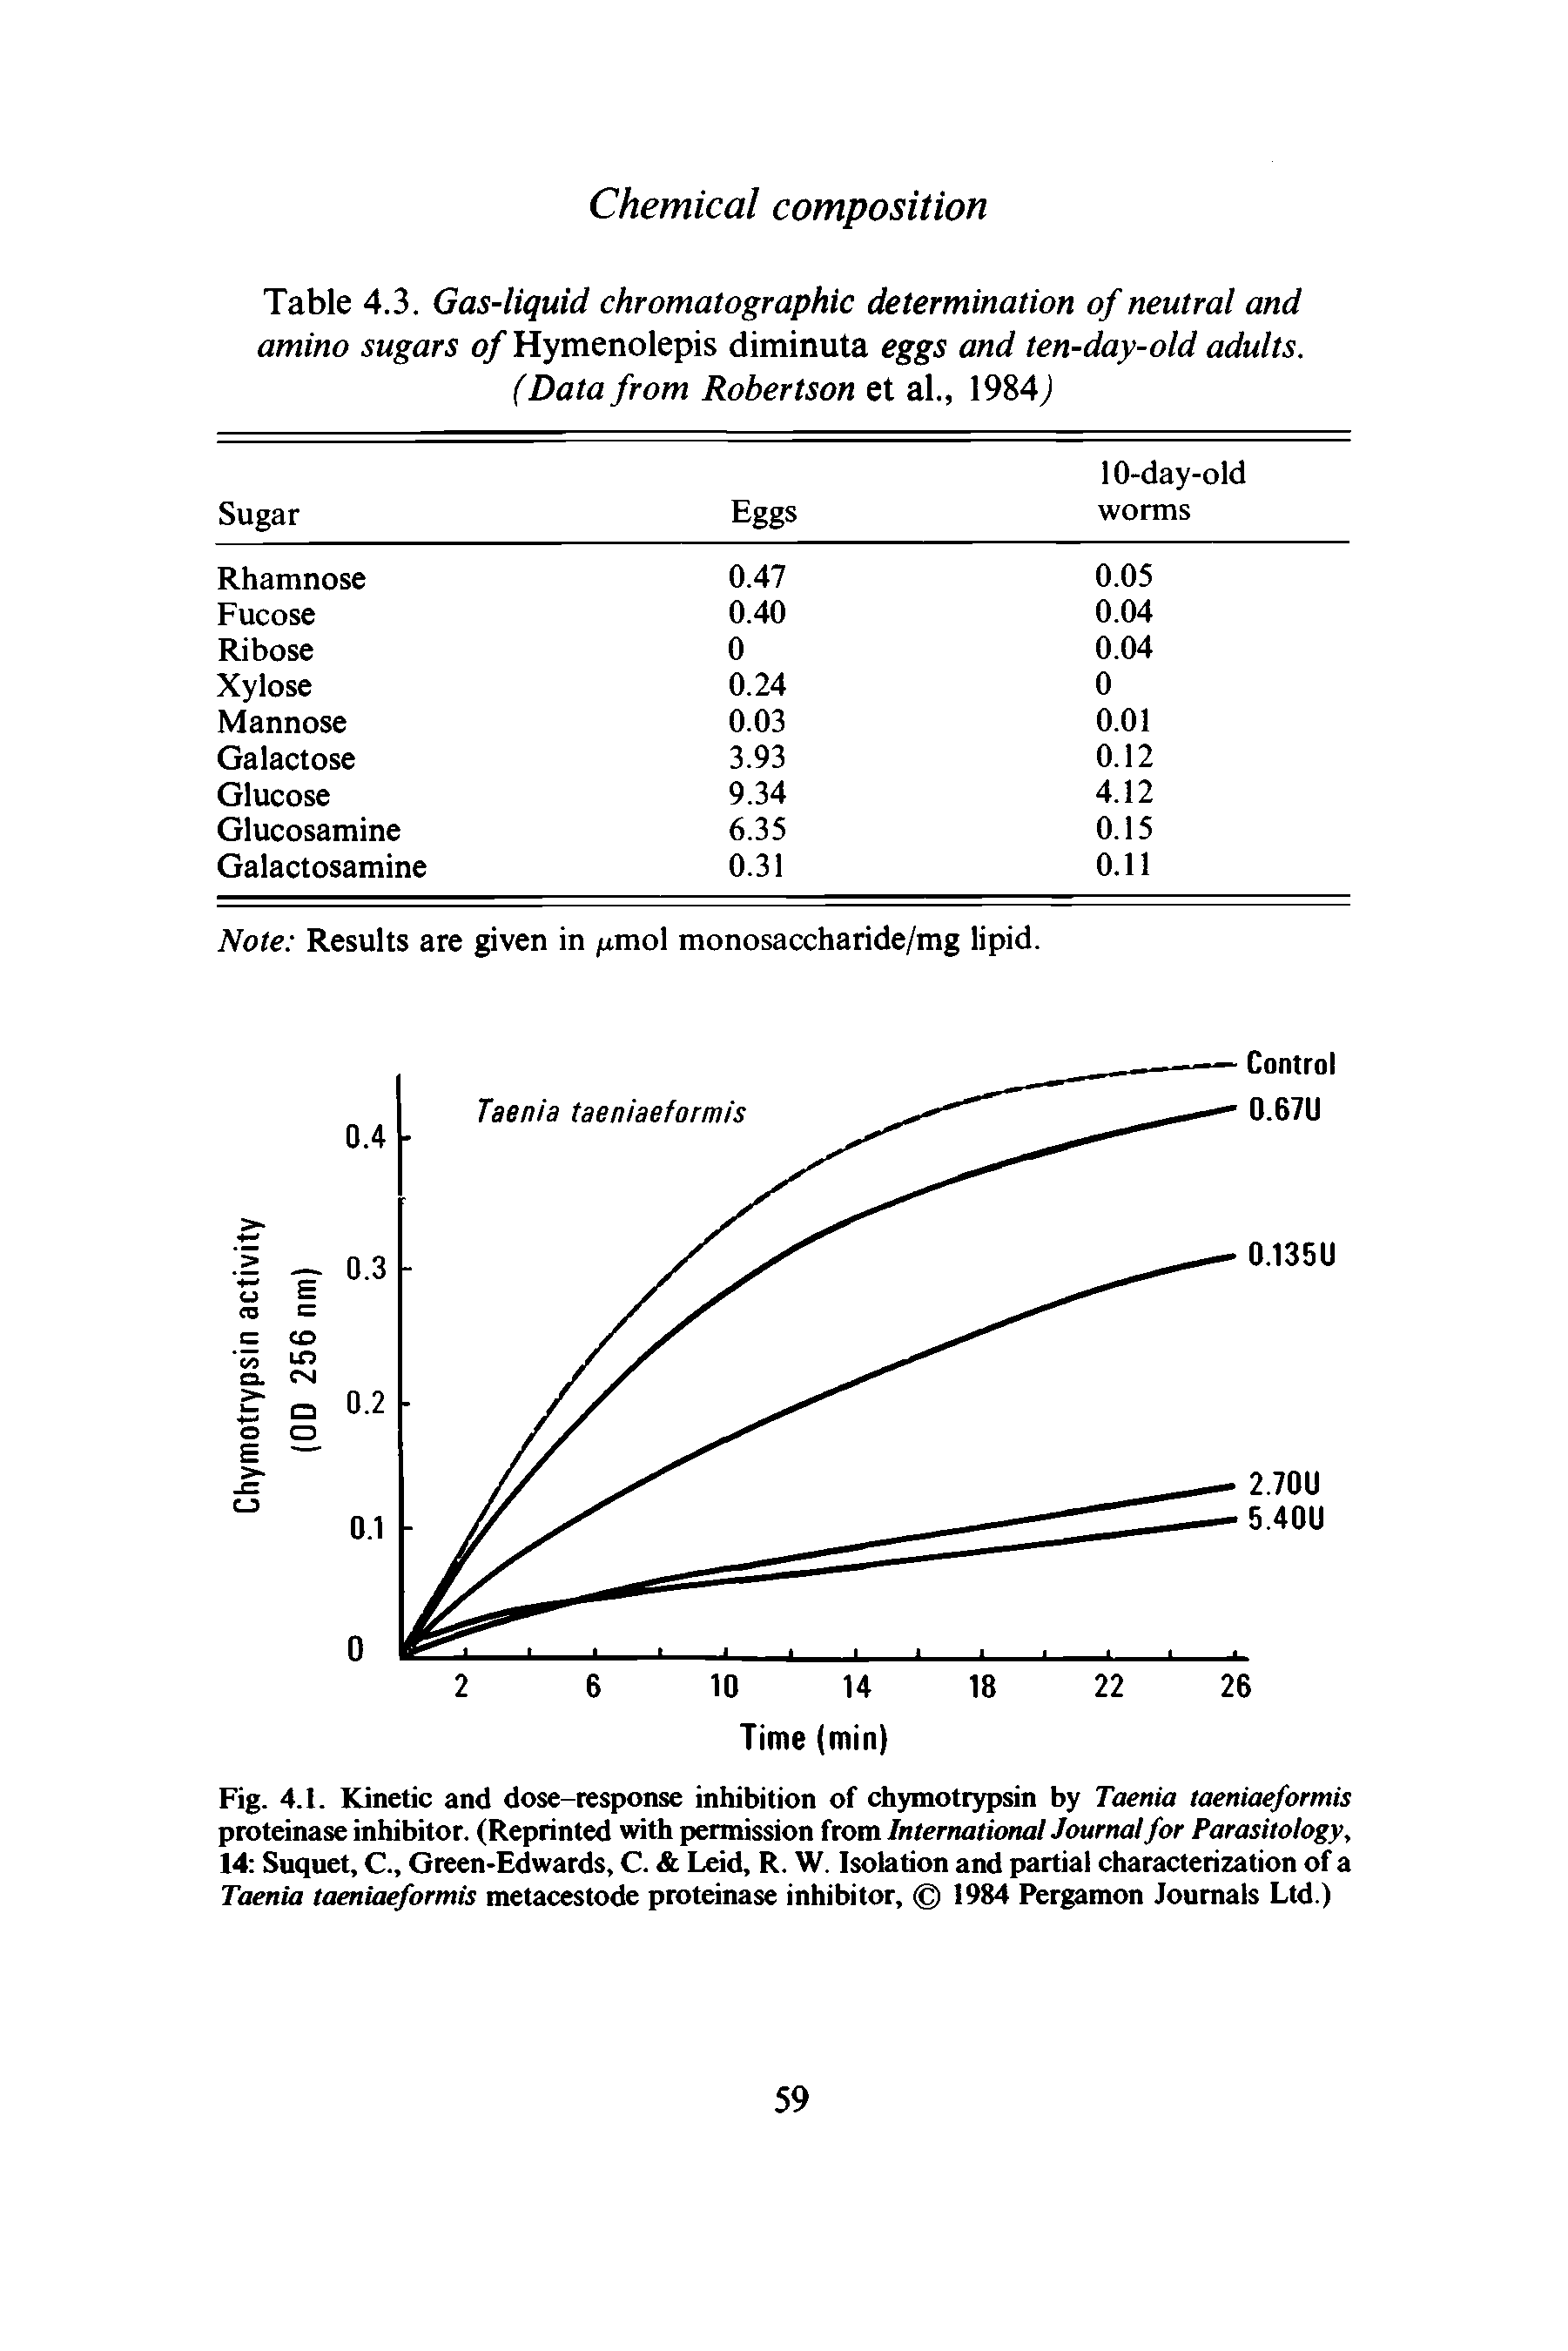 Table 4.3. Gas-liquid chromatographic determination of neutral and amino sugars of Hymenolepis diminuta eggs and ten-day-old adults. (Data from Robertson et al., 1984j...